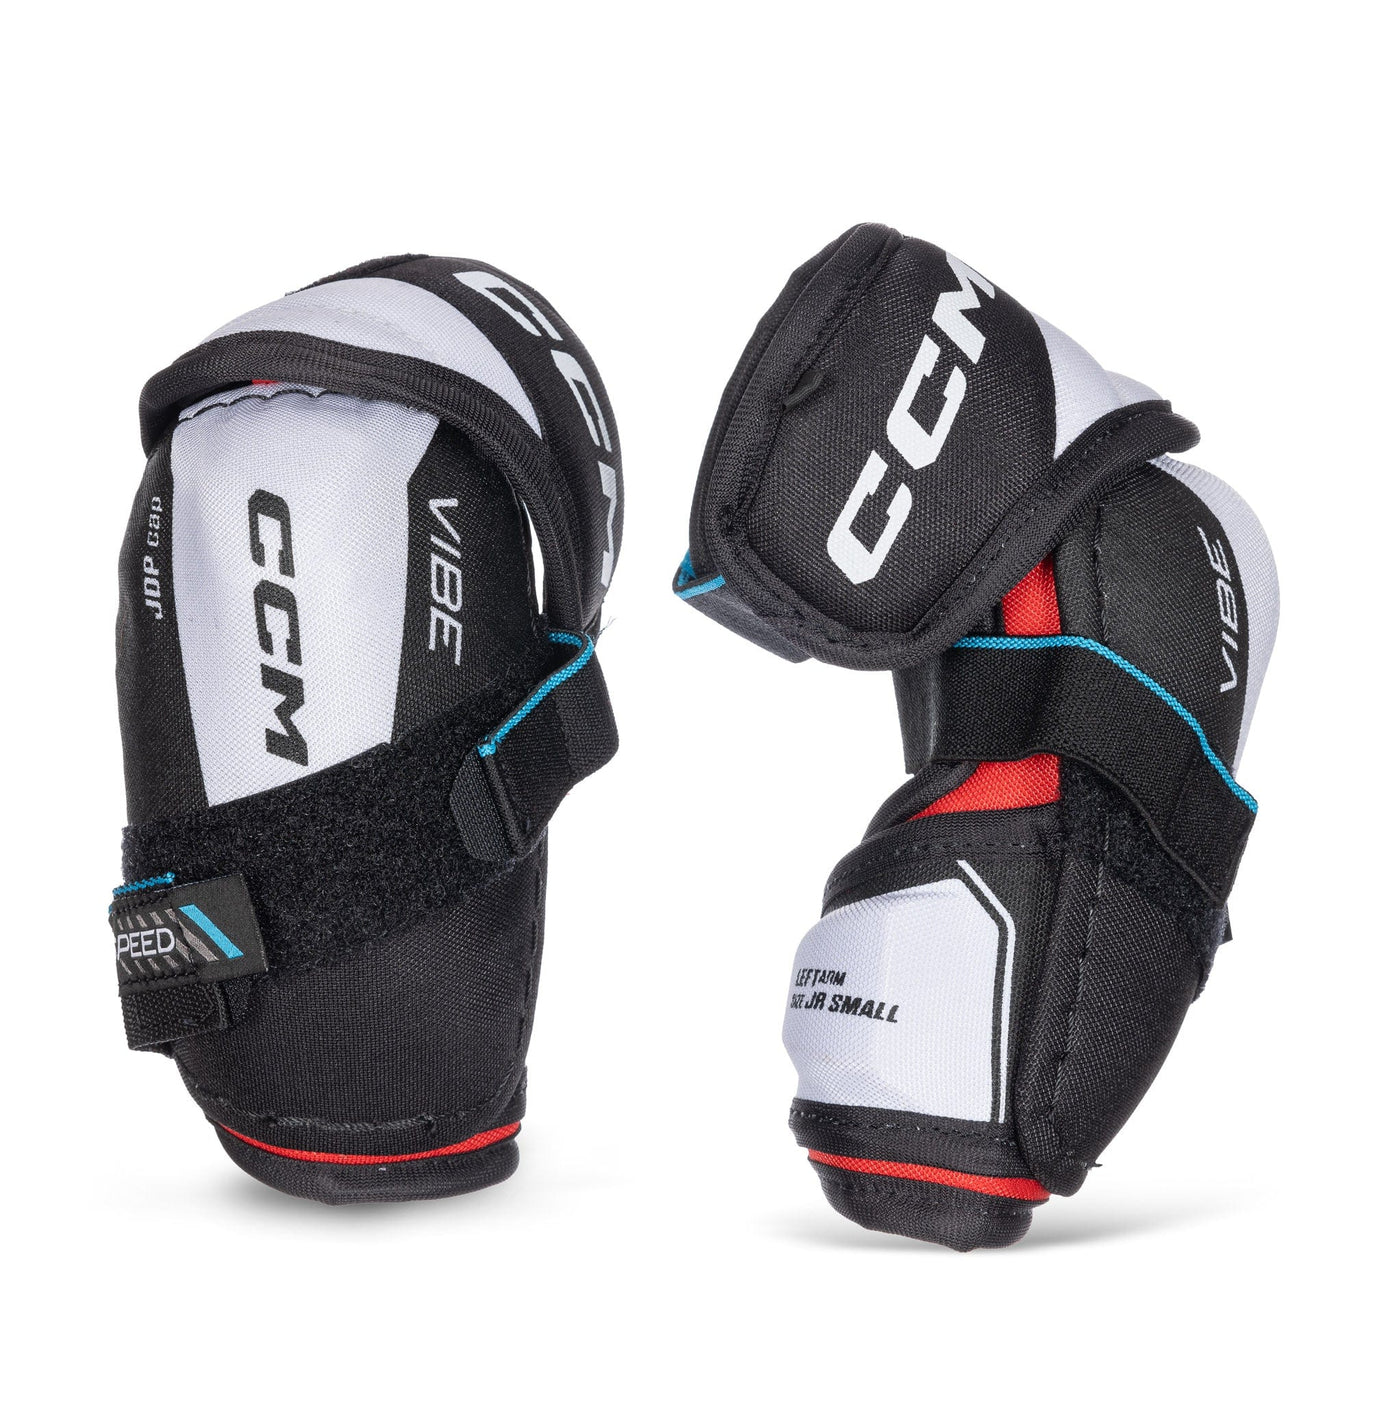 CCM Jetspeed Vibe Junior Hockey Elbow Pads - The Hockey Shop Source For Sports